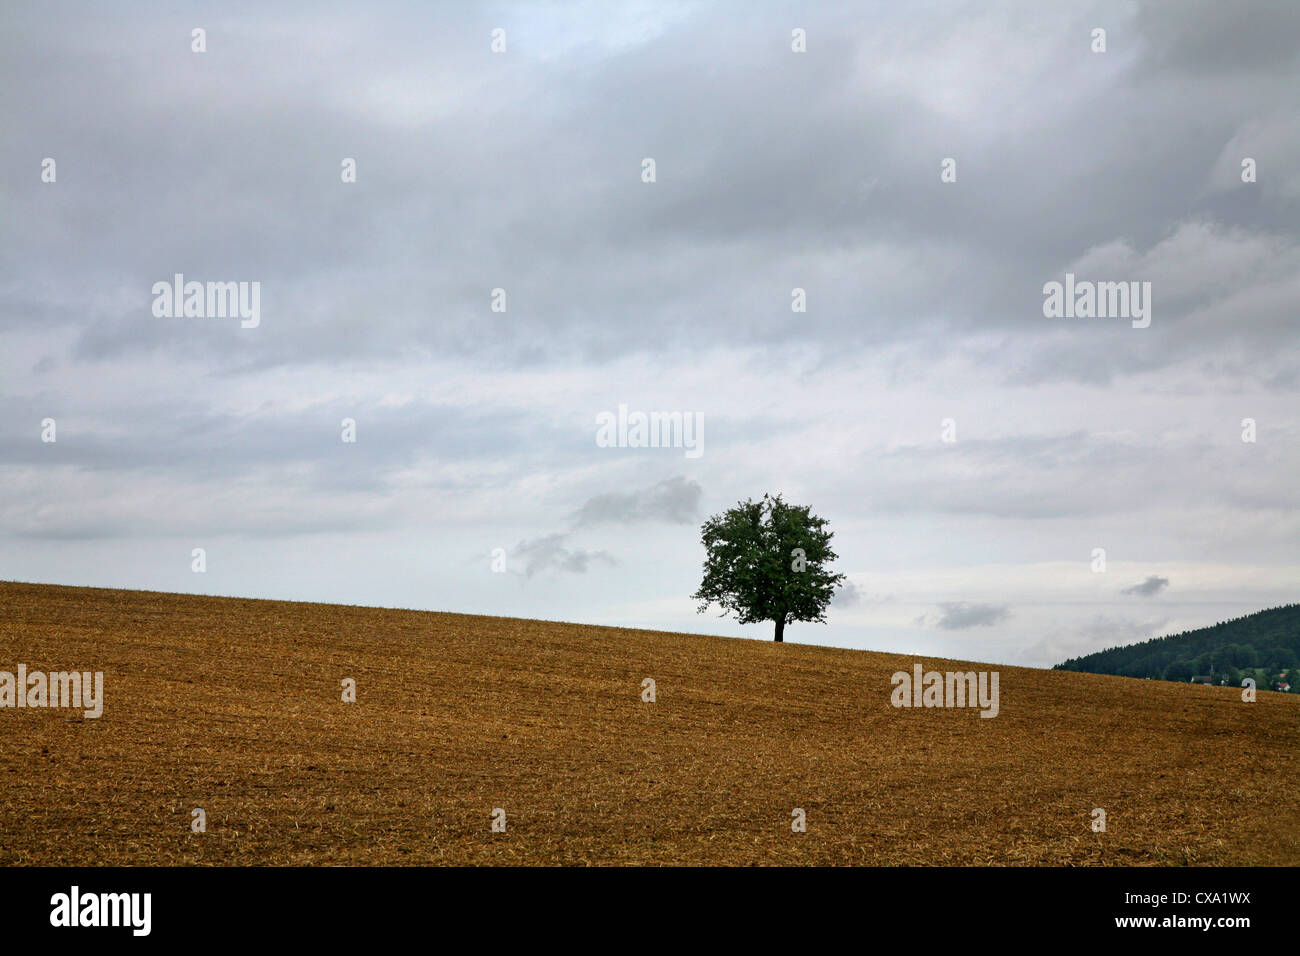 Landscape with tree Stock Photo